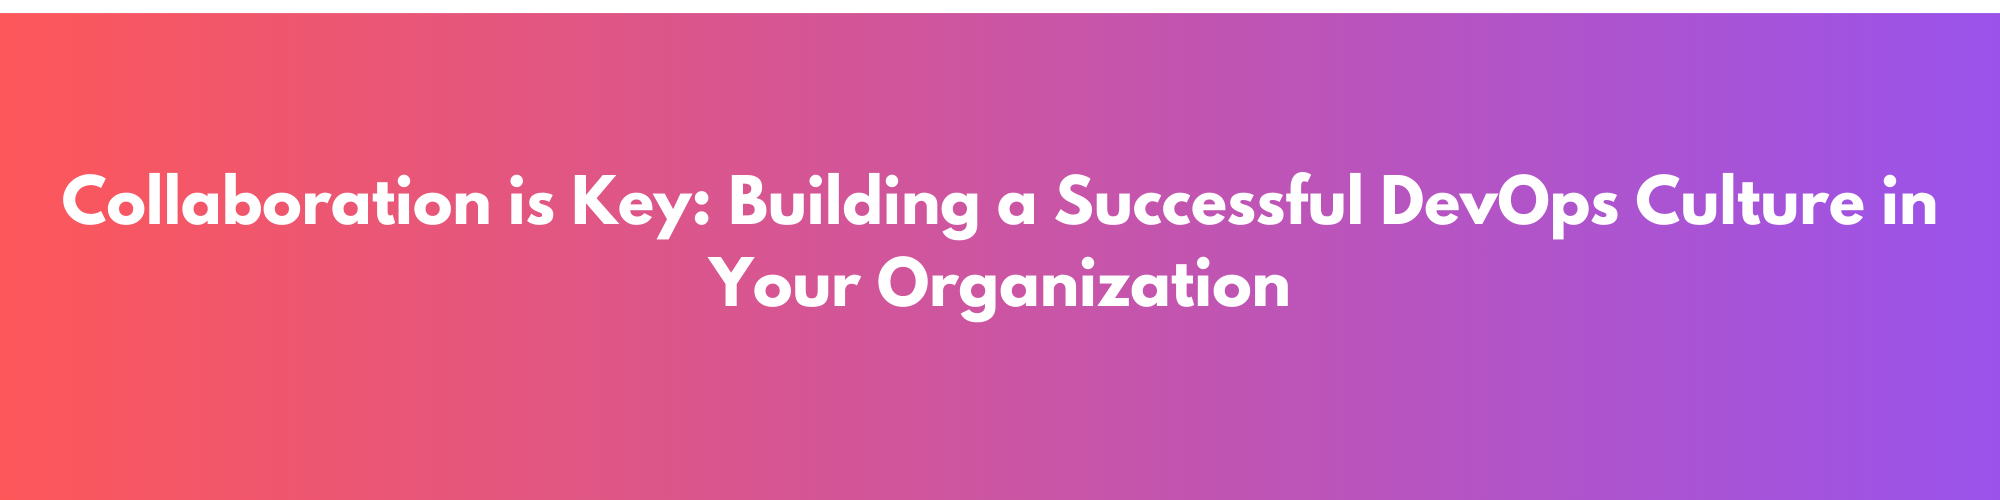 Collaboration is Key: Building a Successful DevOps Culture in Your Organization